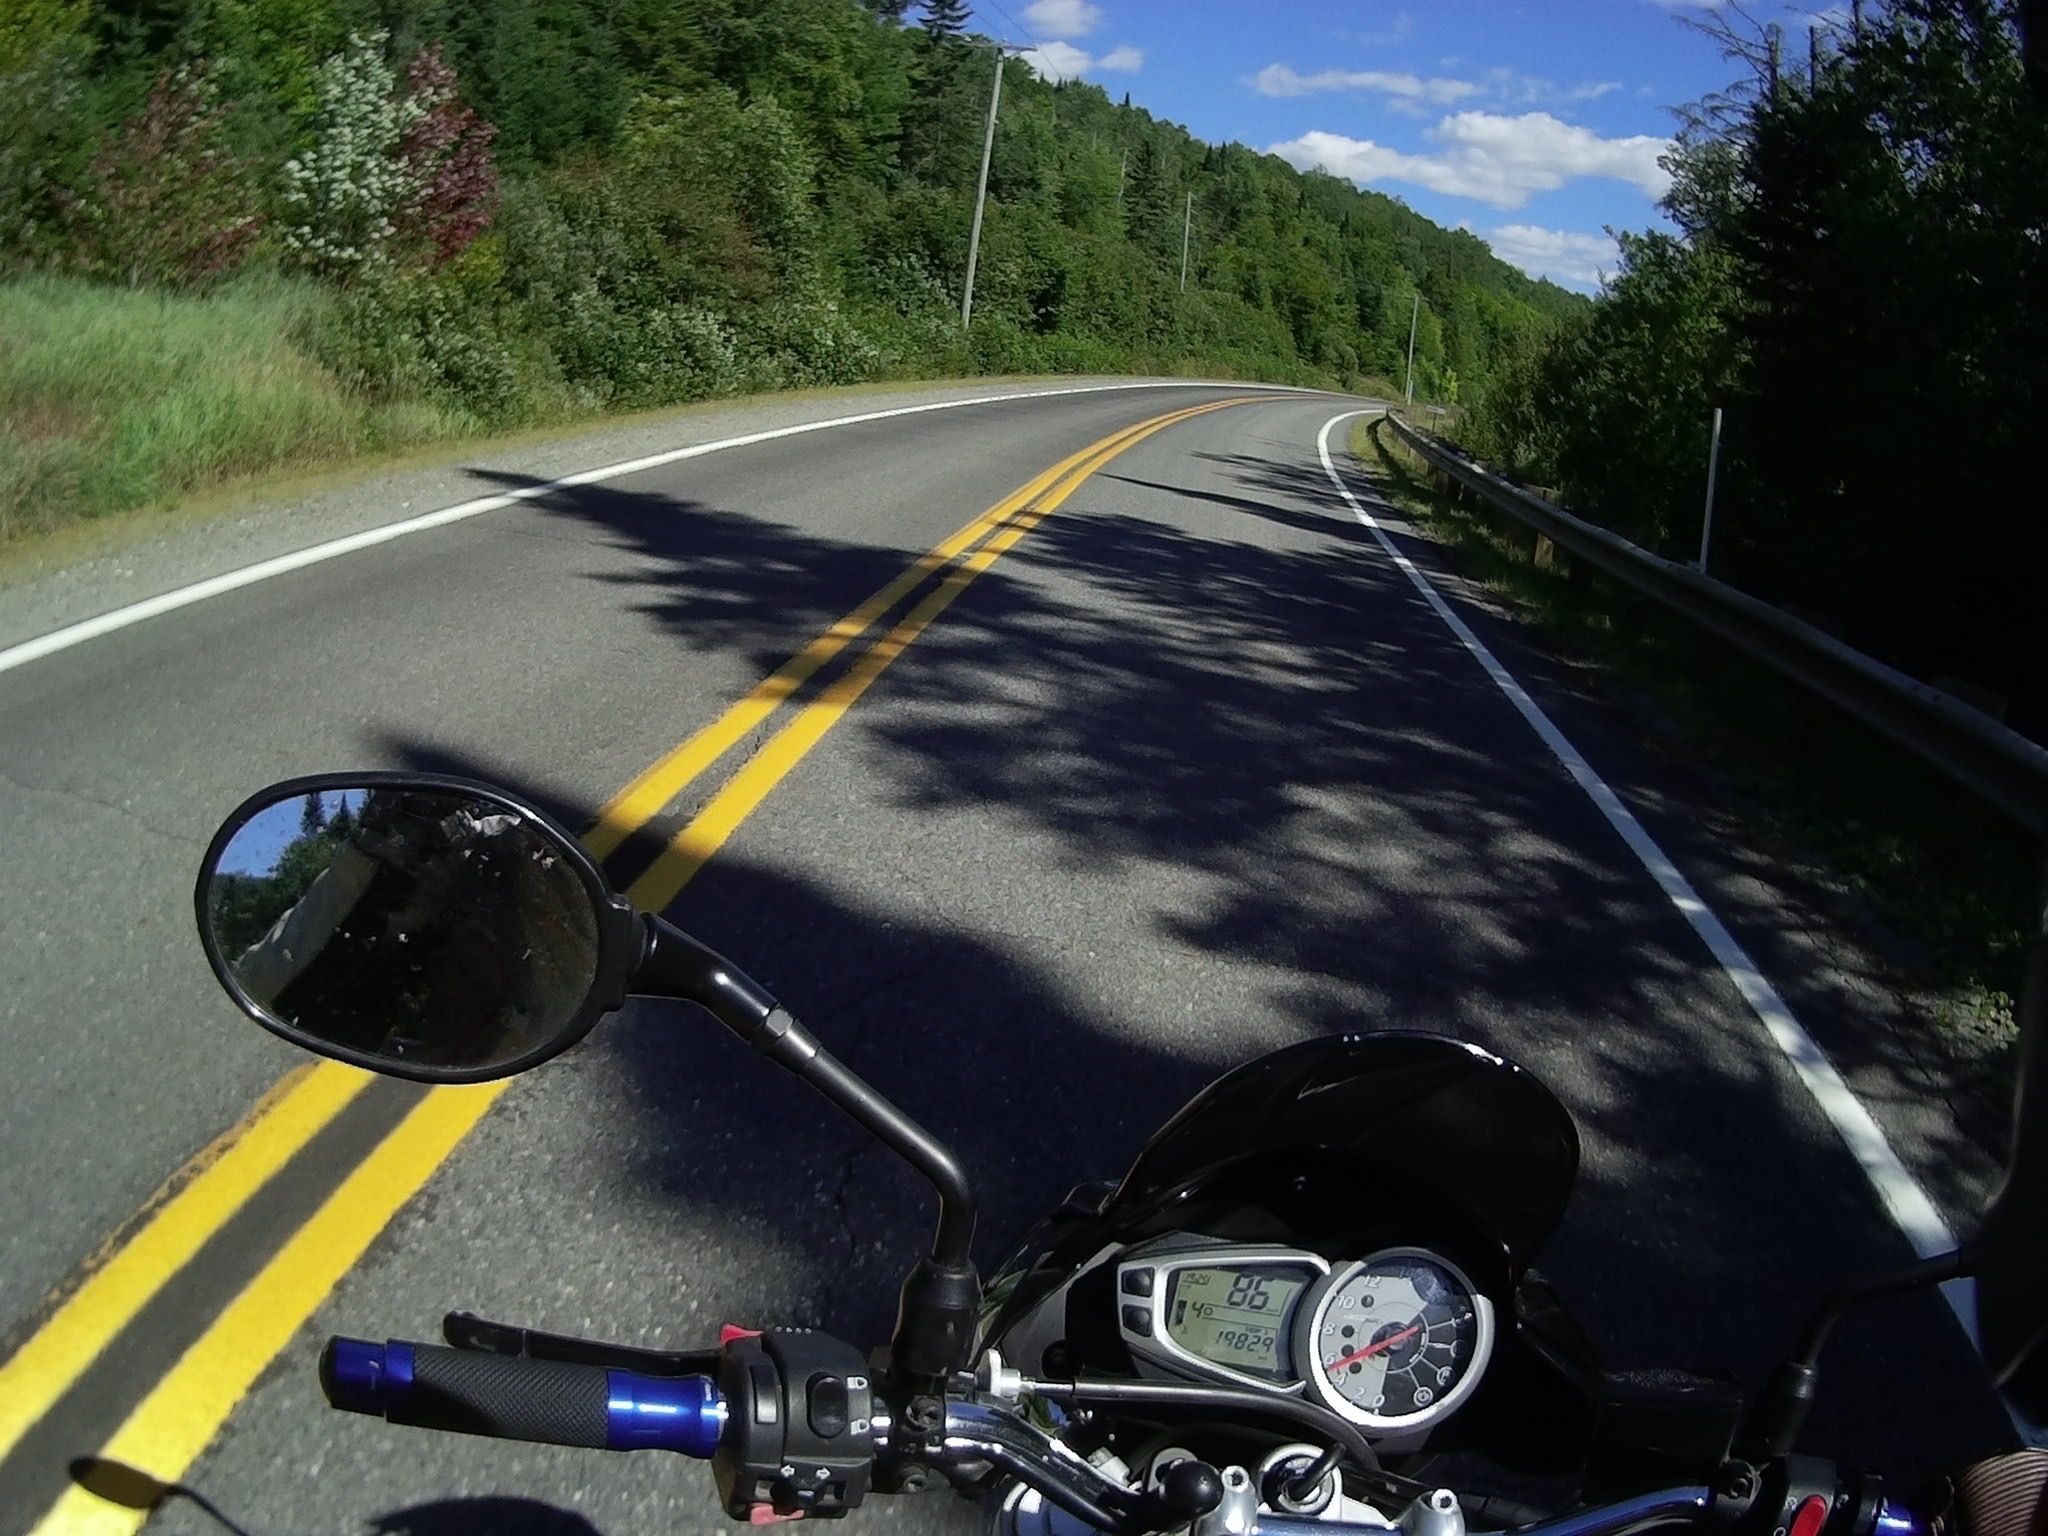 Saint Malo to Coaticook - Eastern Townships of Quebec